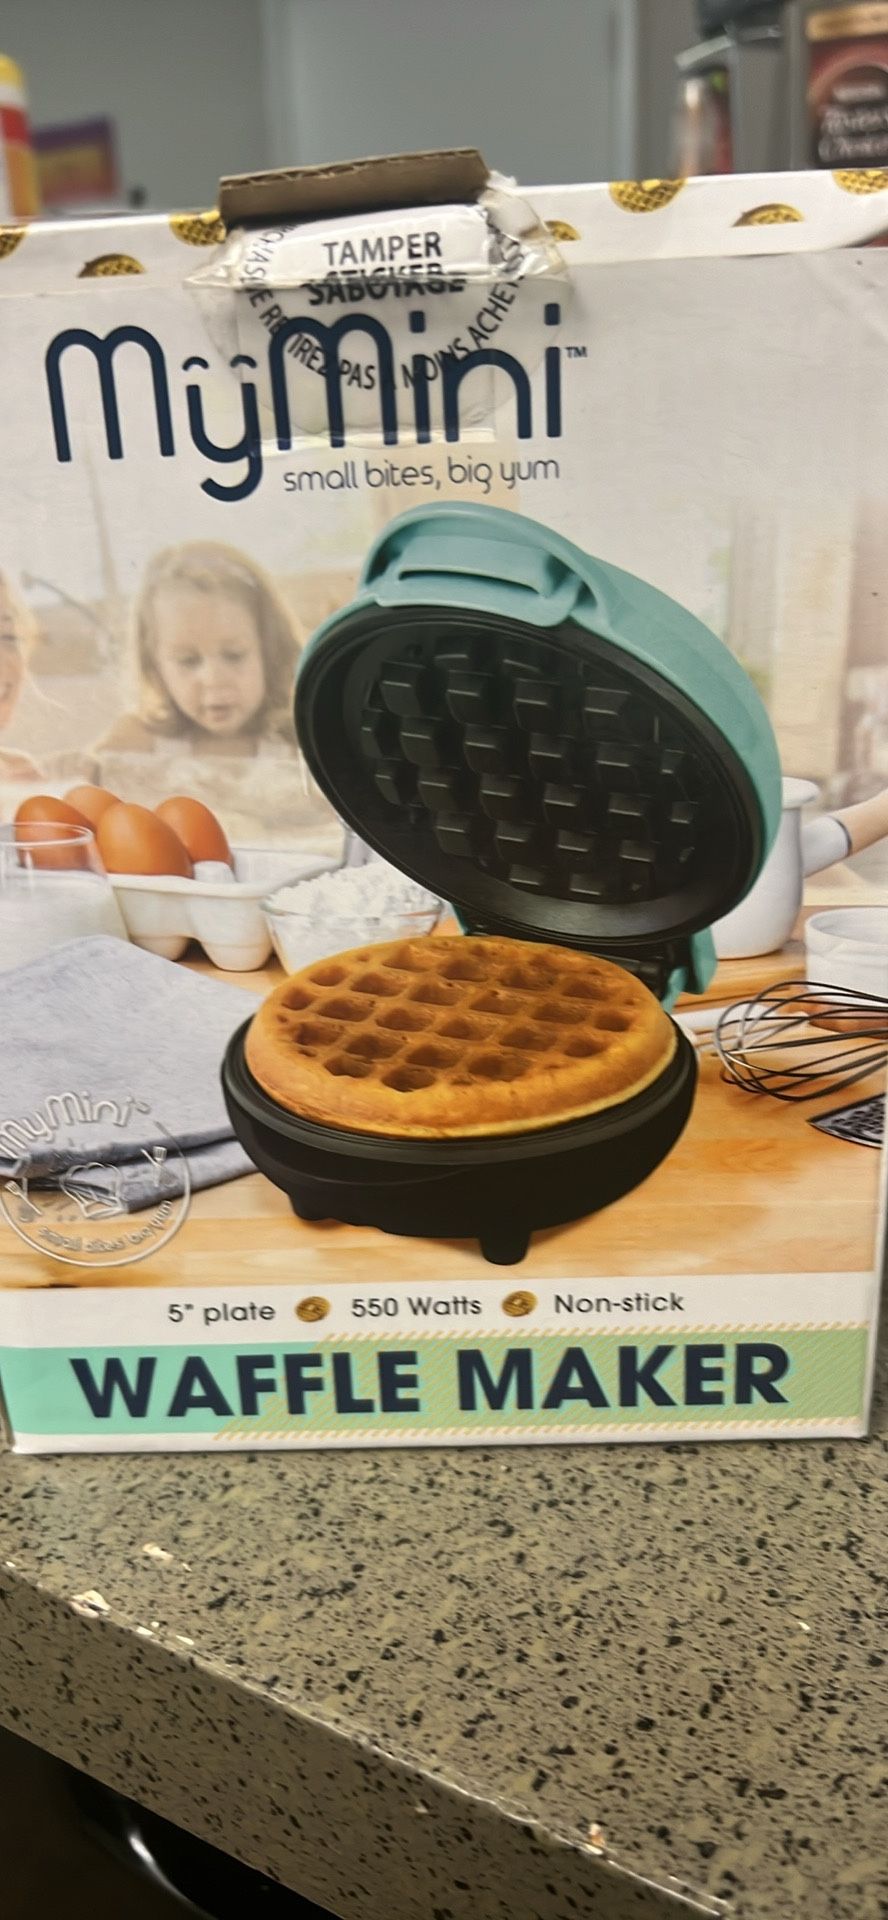 Set of Farberware Knives, blender, Instant Pot, Scale, Toaster and waffle maker